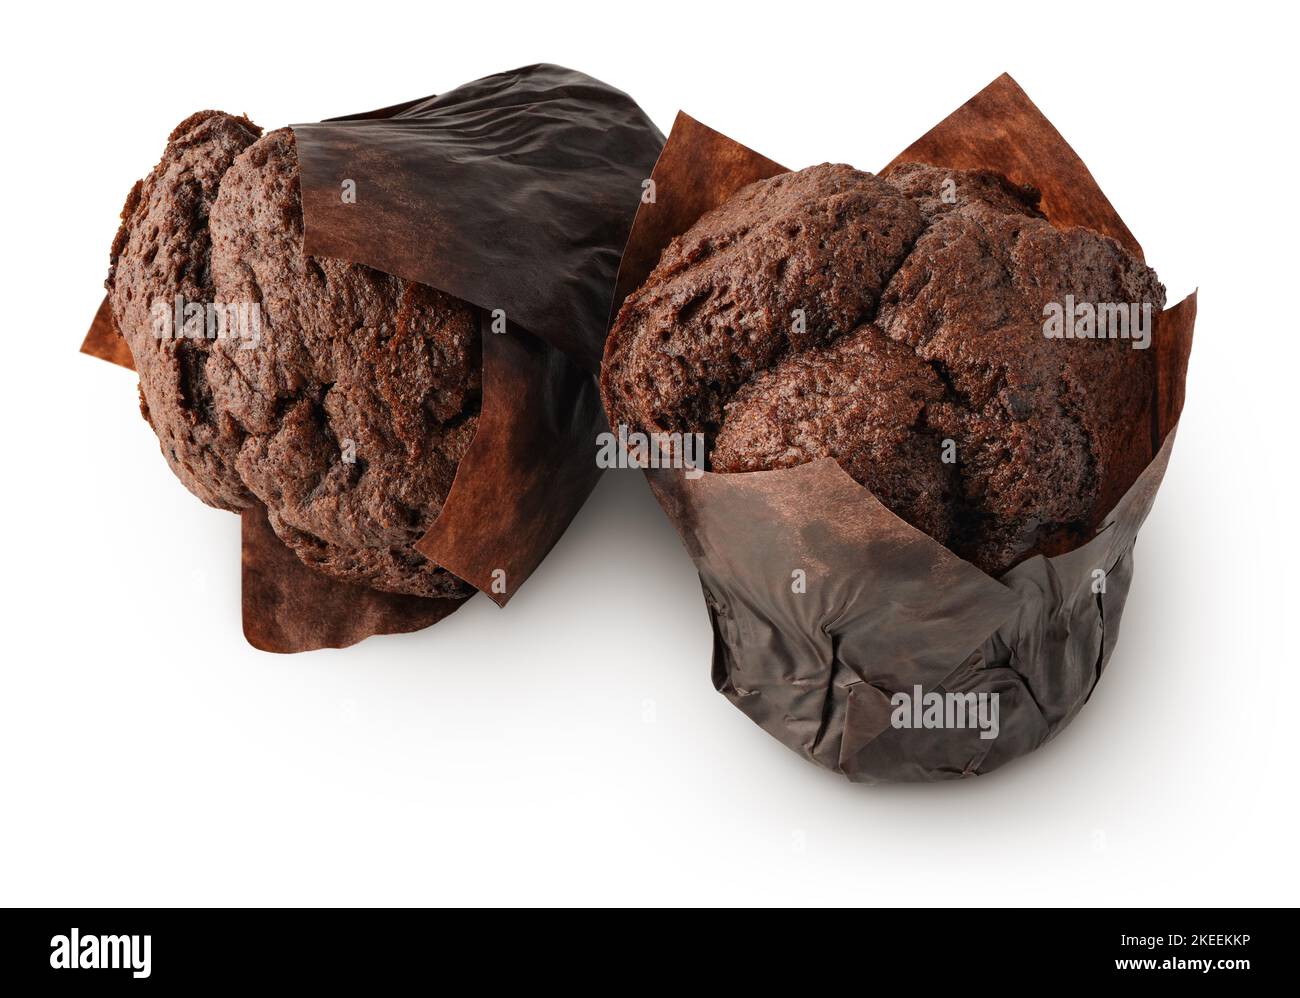 Two dark chocolate muffins, or cupcakes, isolated on white background Stock Photo